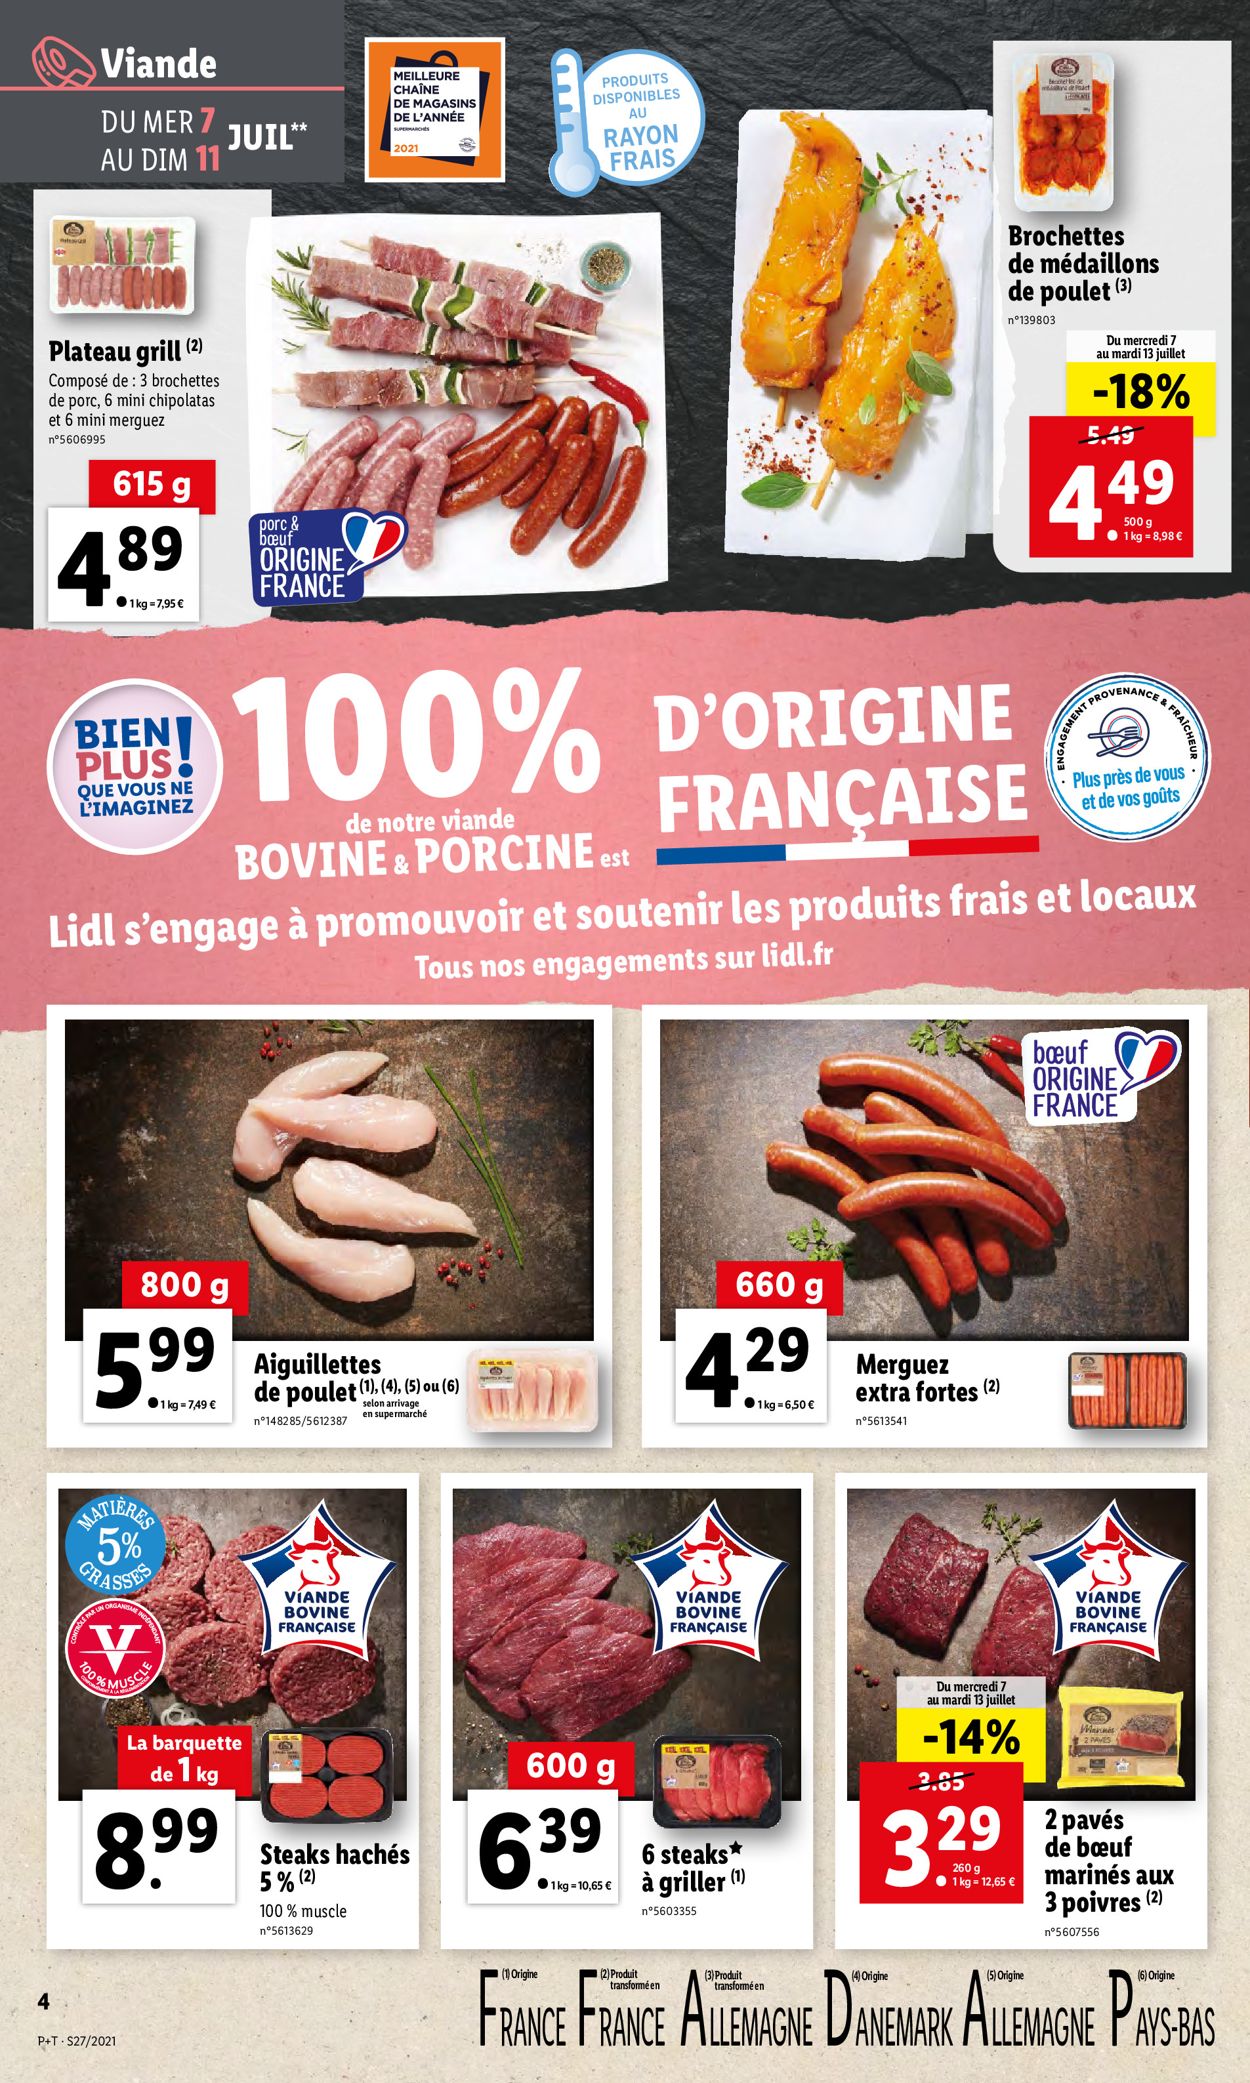 Lidl Catalogue - 07.07-13.07.2021 (Page 4)